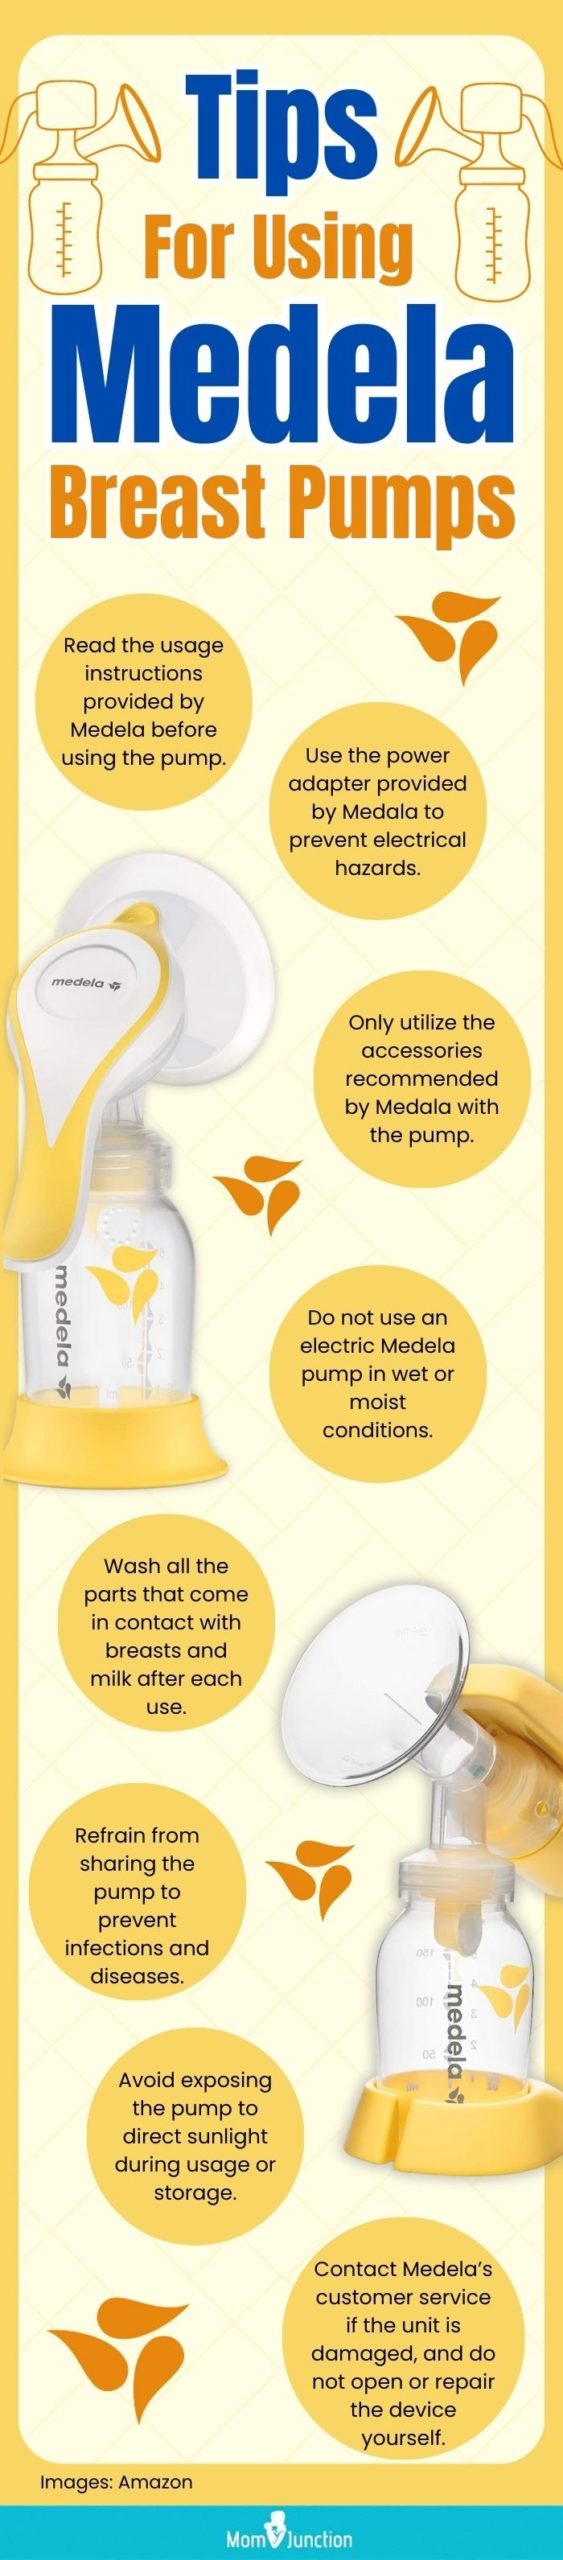 Tips For Using Medela Breast Pumps (infographic)